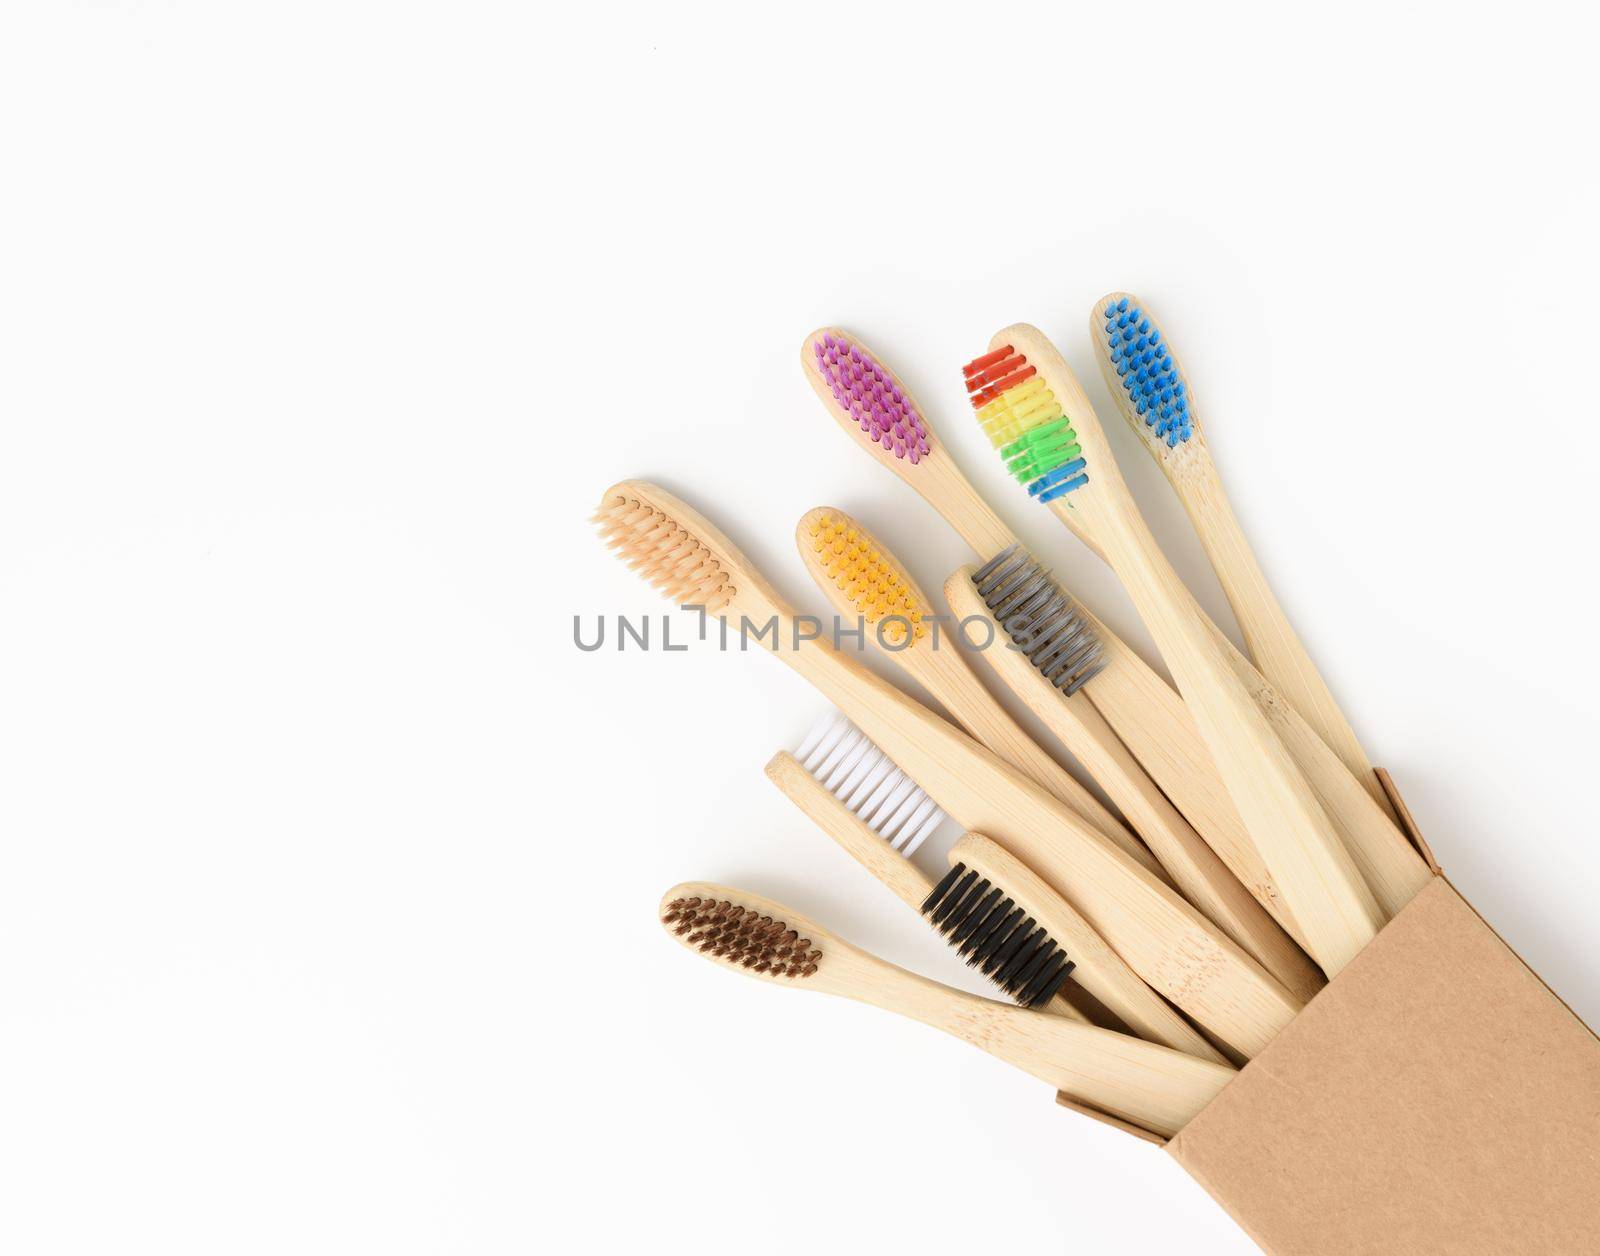 wooden toothbrushes on a white background, plastic rejection concept by ndanko